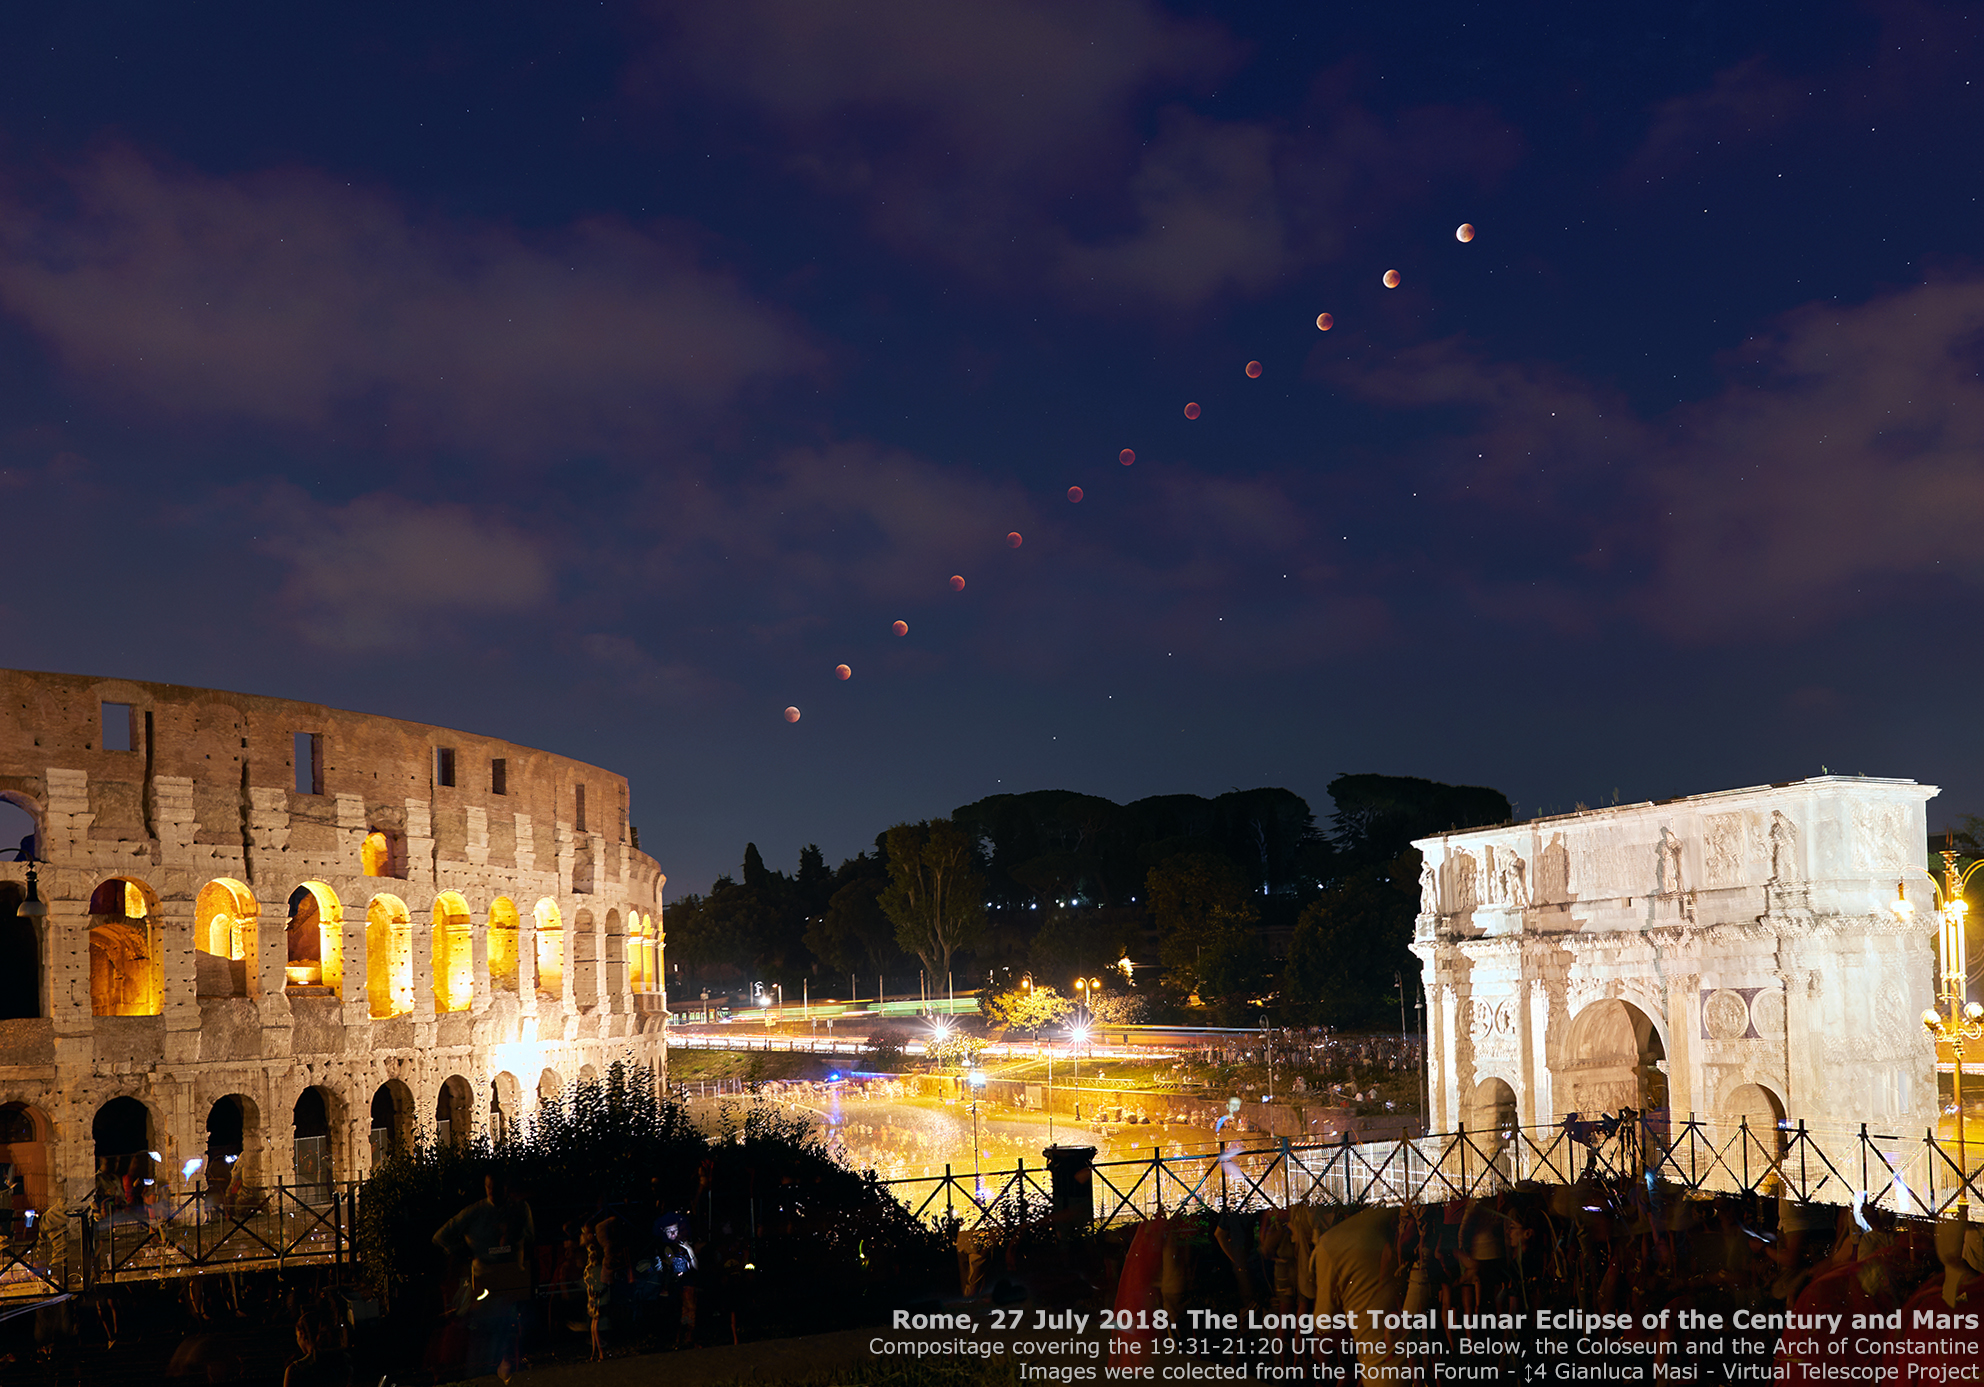 The eclipsed Moon and planet Mars cross the sky above the Colosseum and the Arch of Constantine - 27 July 2018